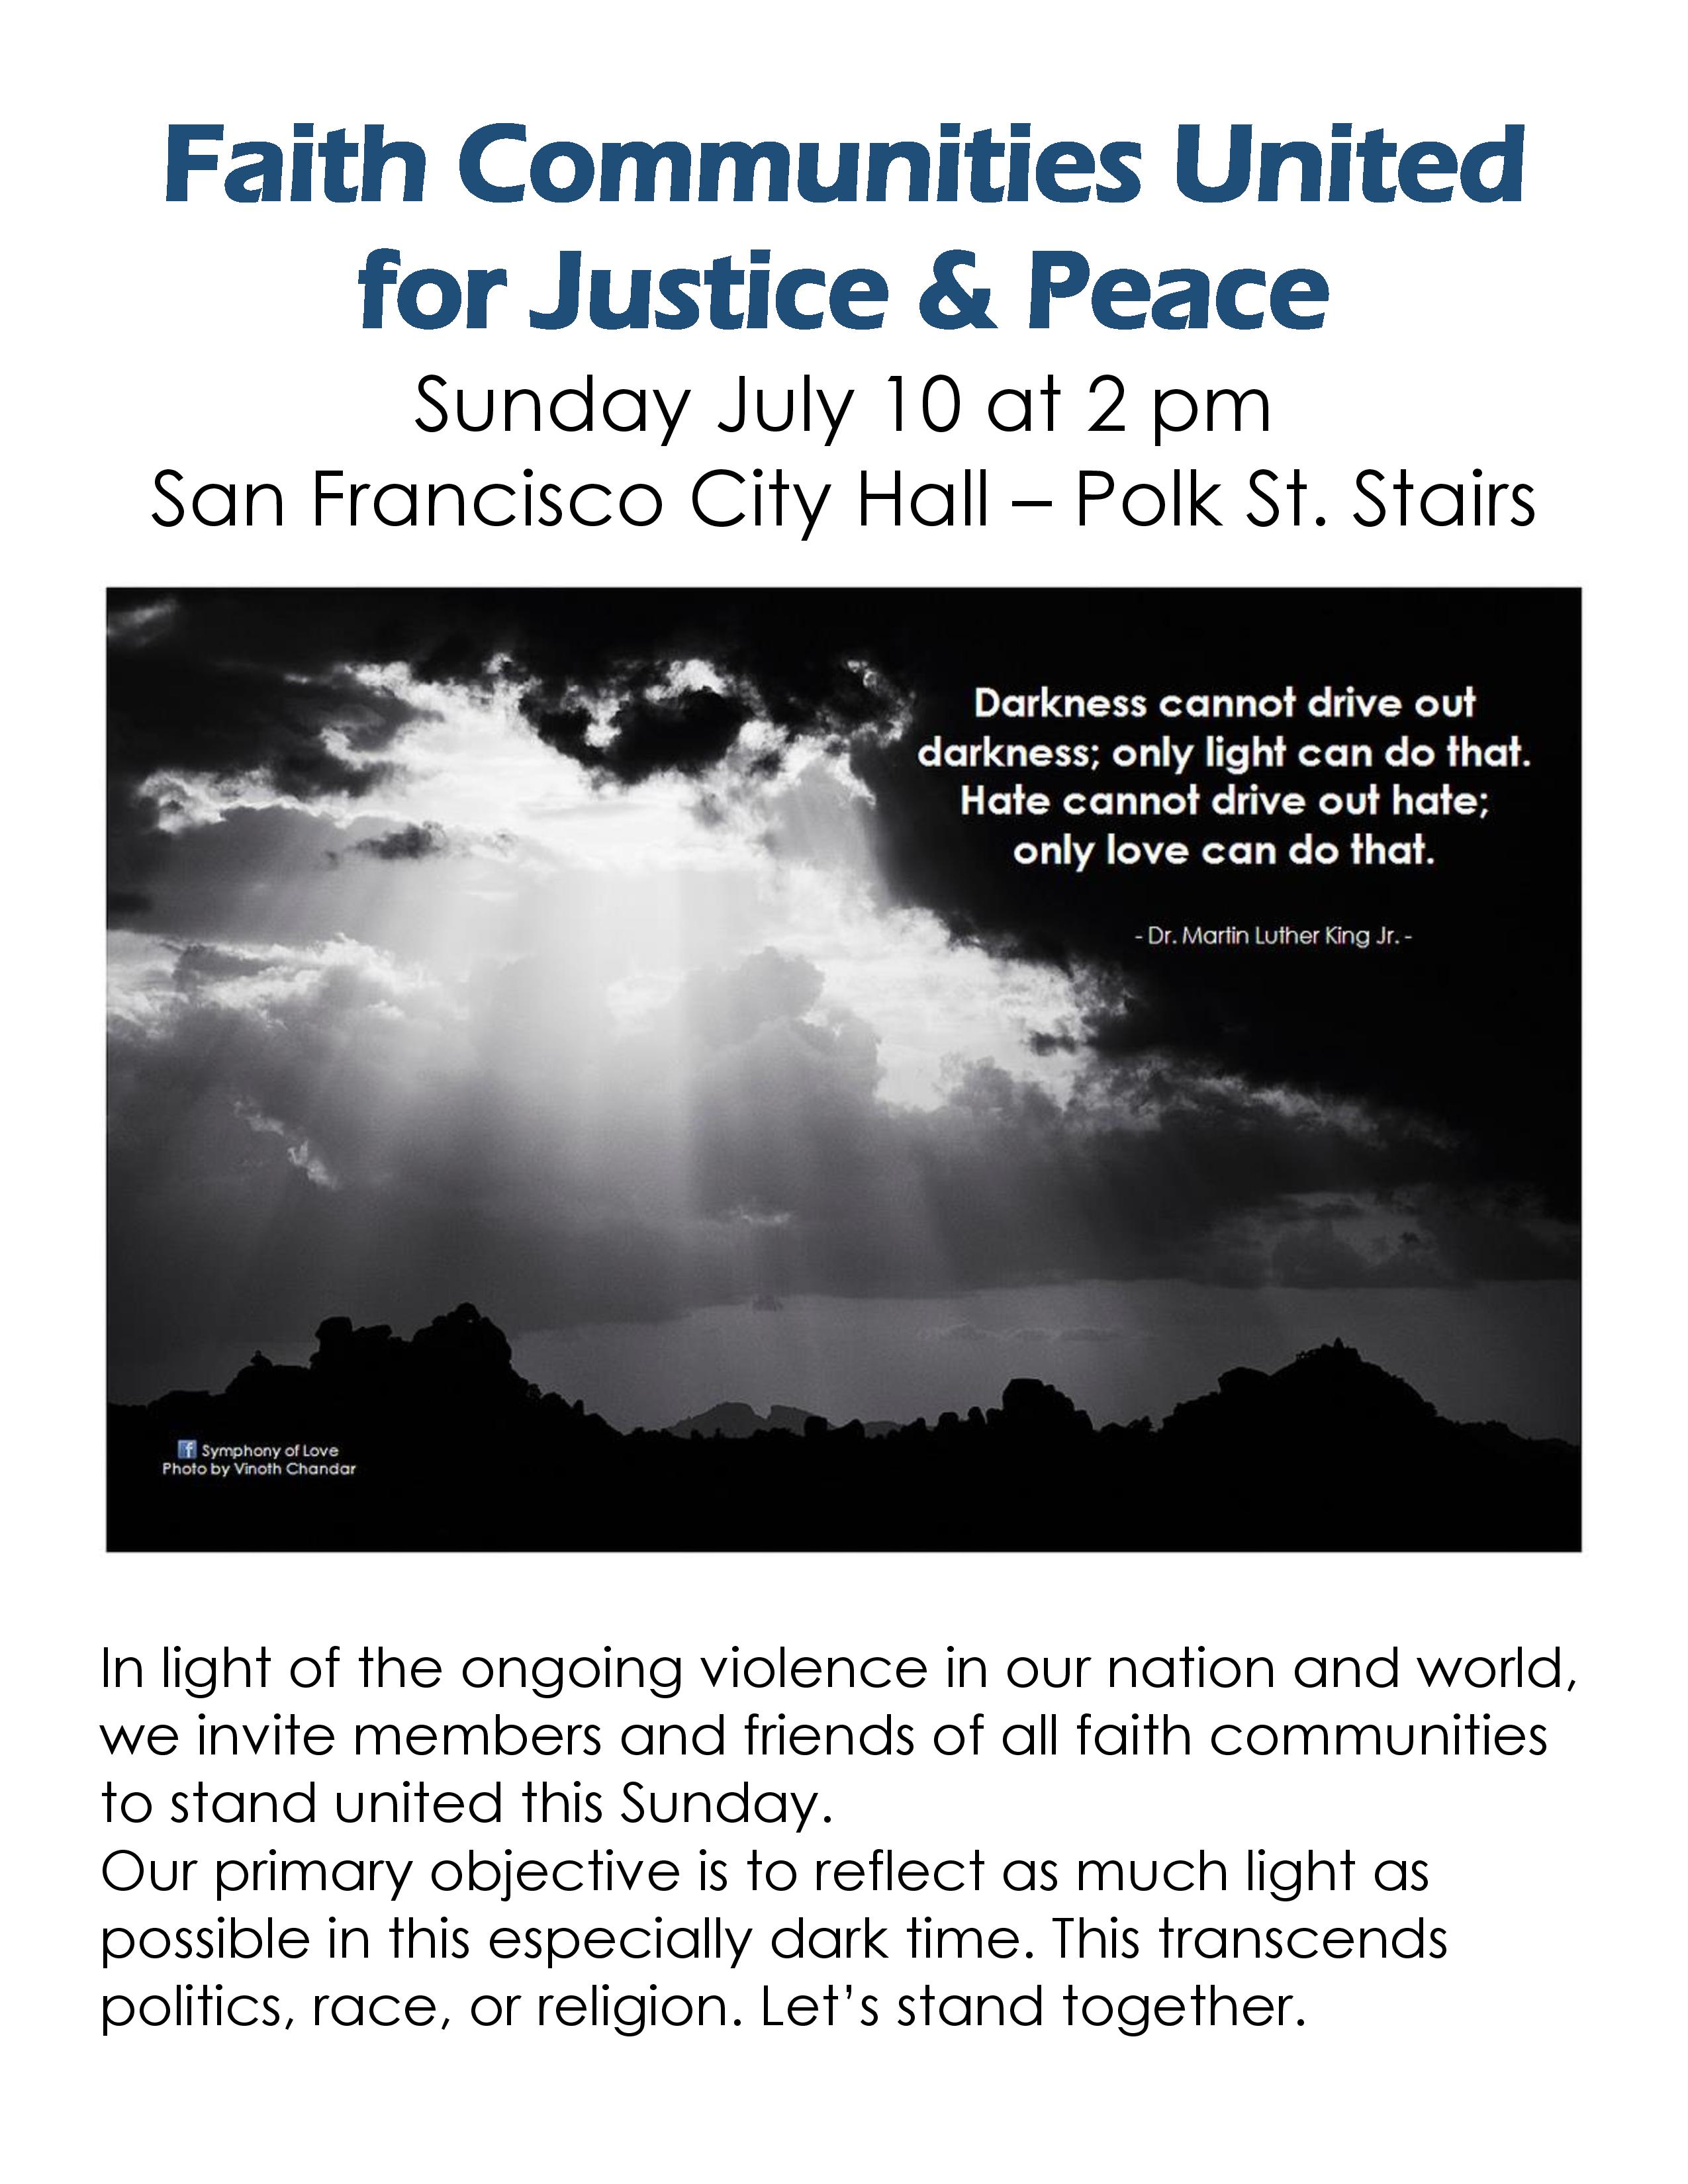 Faith Communities United for Justice & Peace